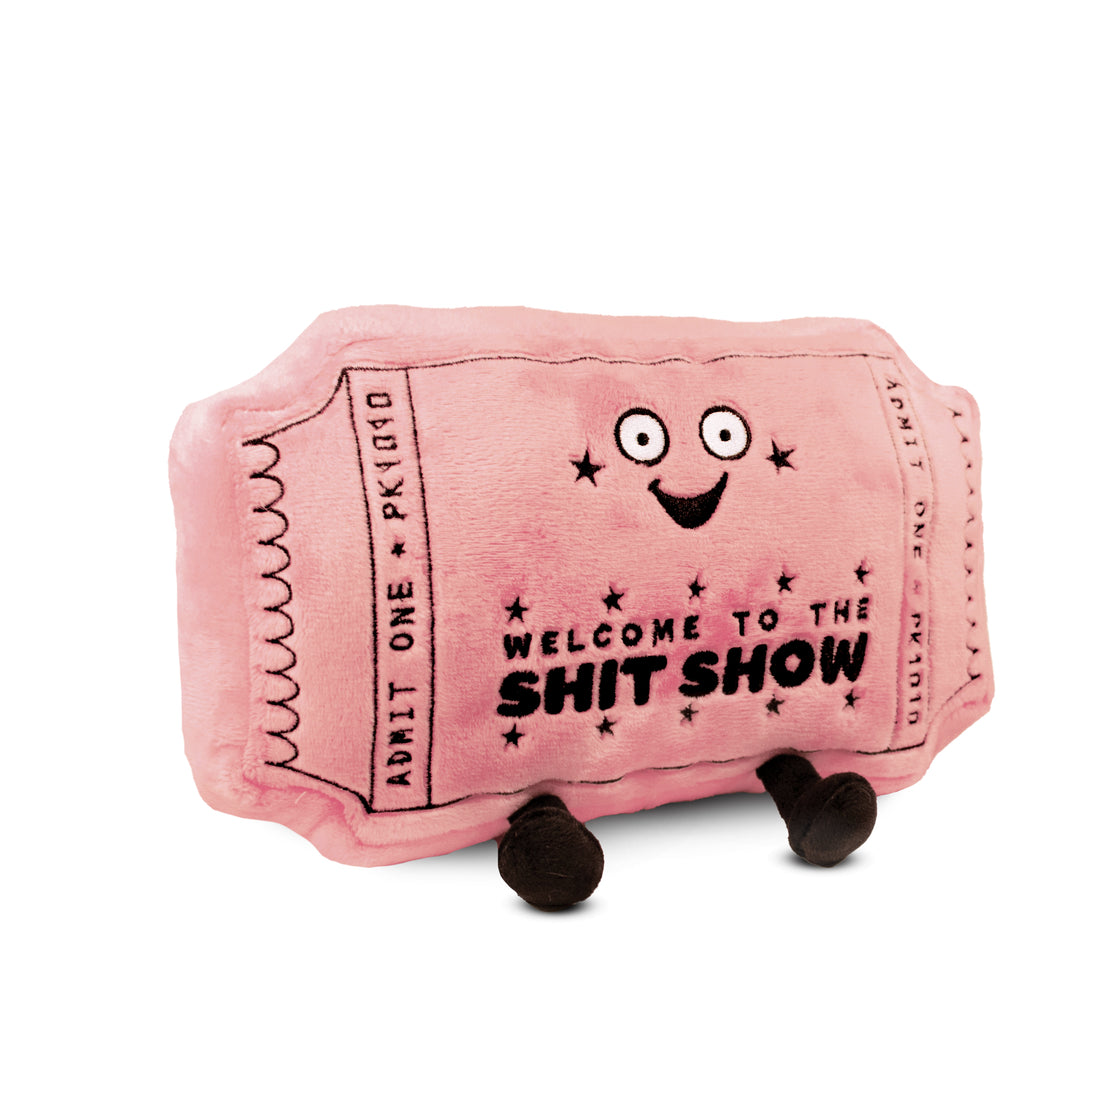 &quot;Welcome to the Shit Show&quot; Ticket Plush